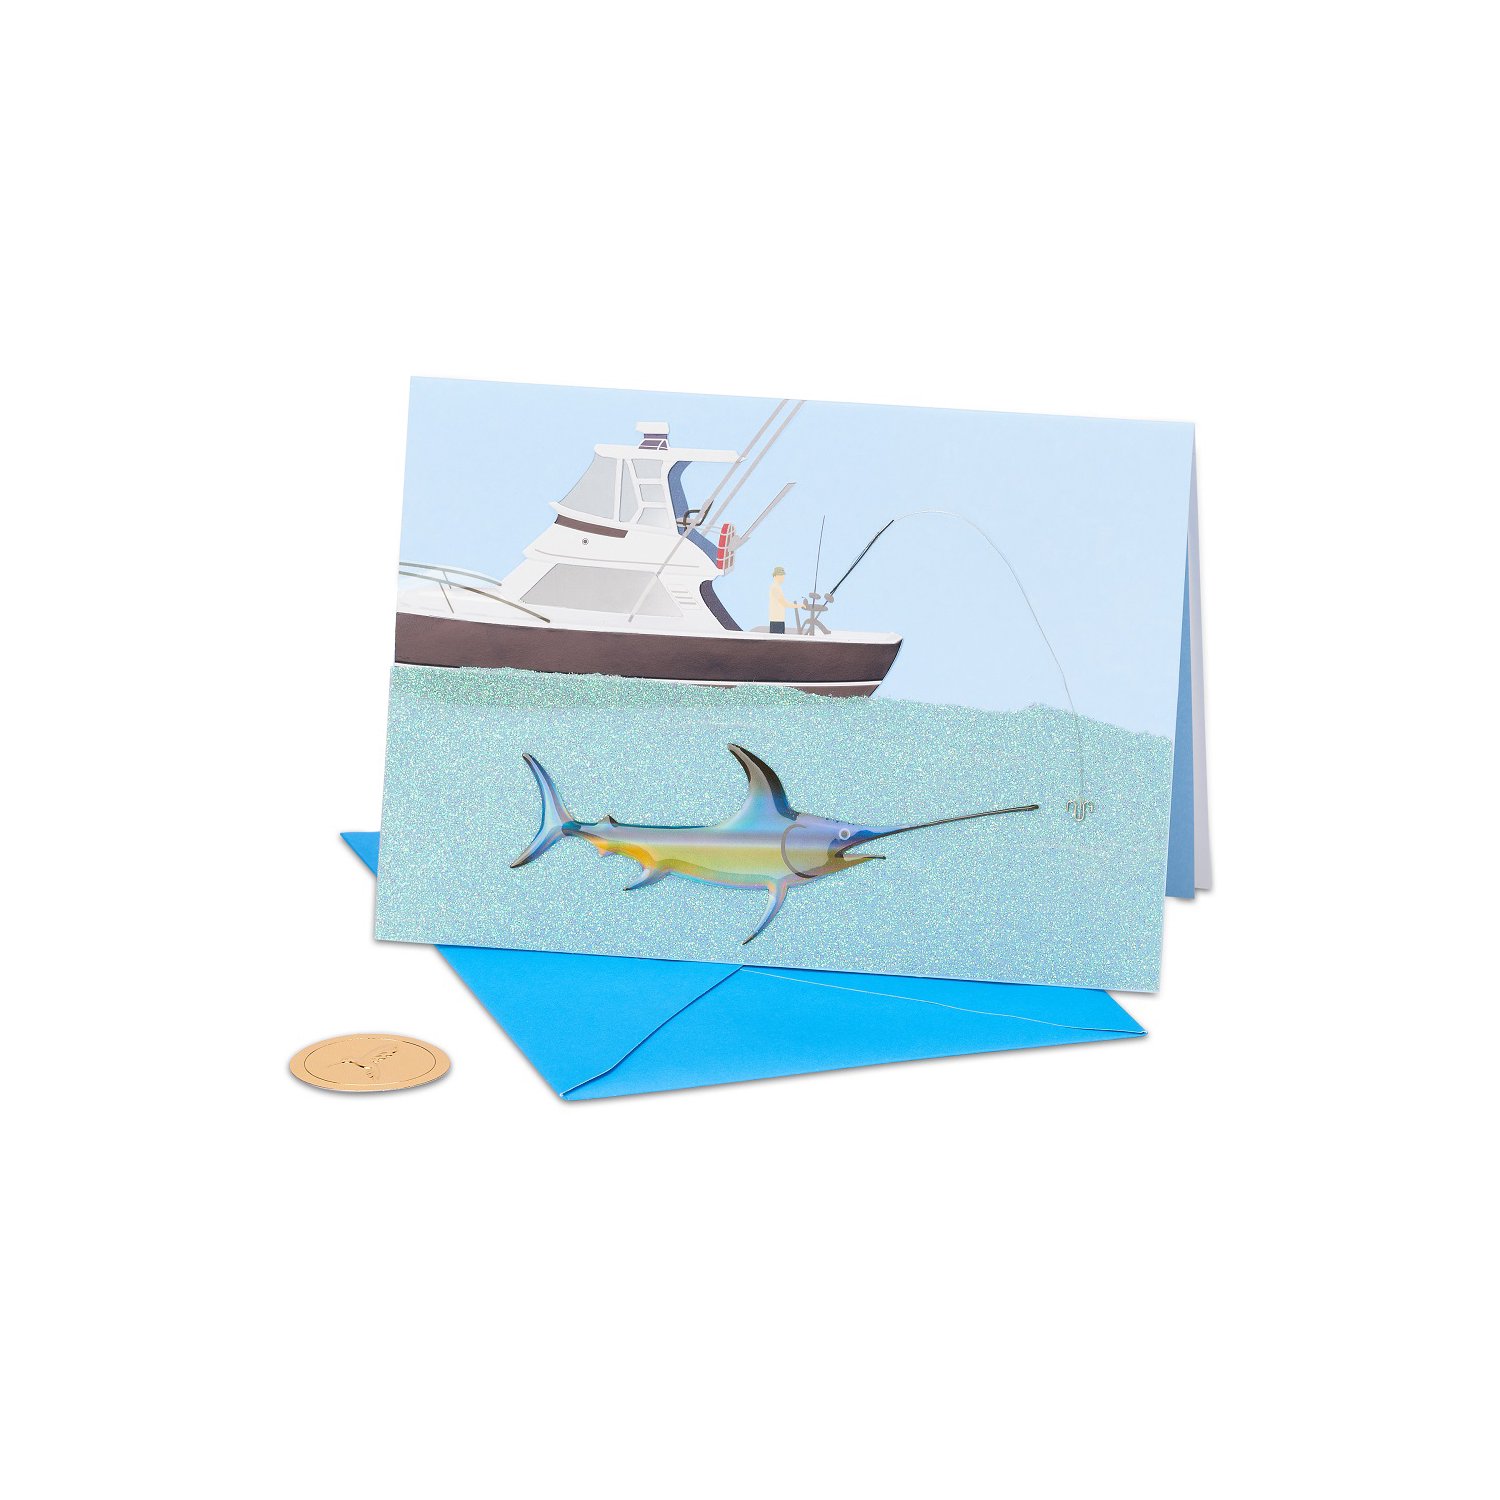 Fishing from wooden Canoe in Mountain Lake ADVENTURE Papyrus Father's Day card 